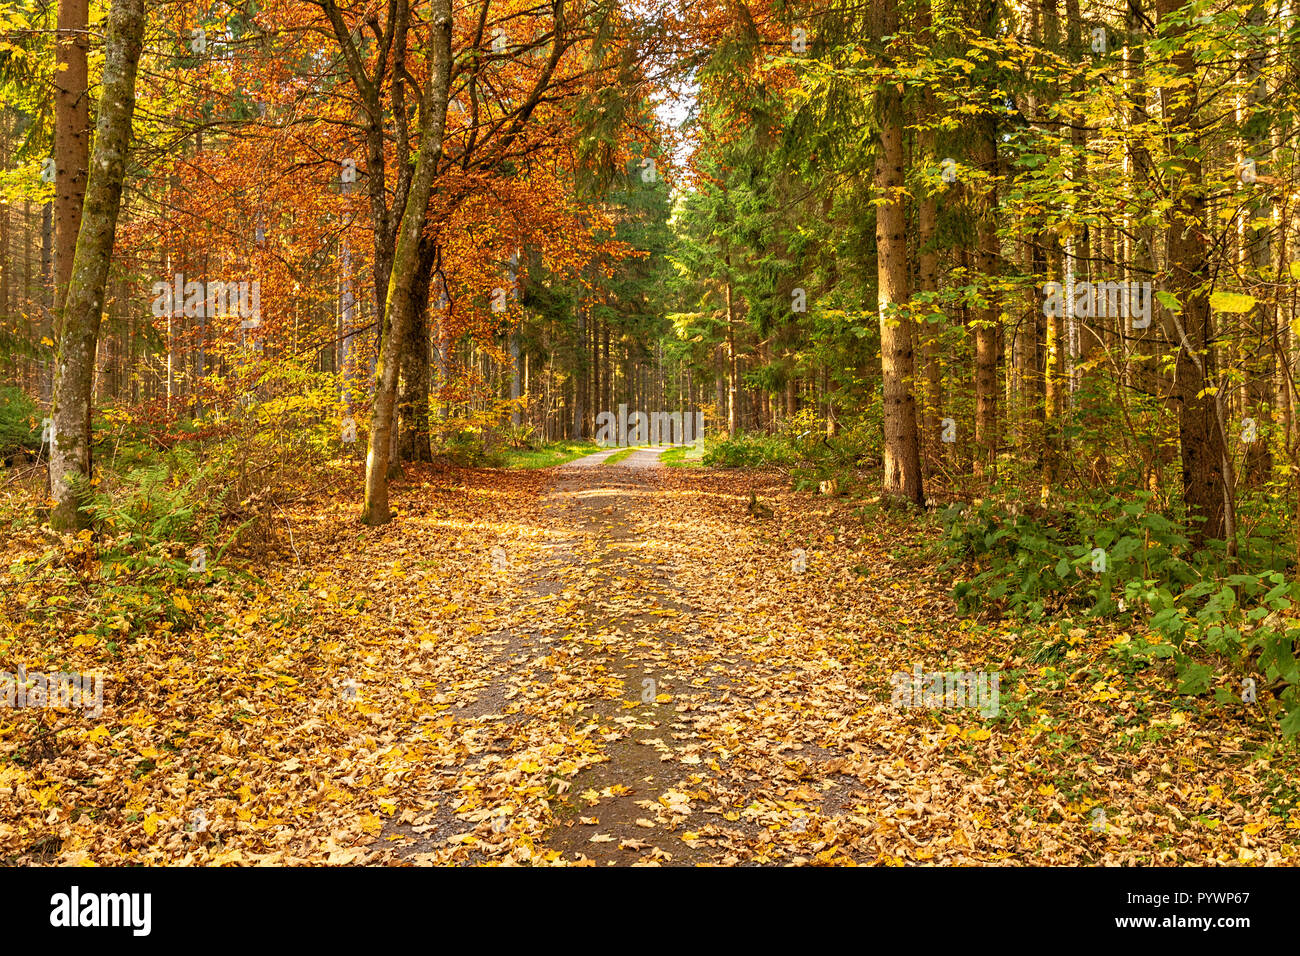 Hiking impression in the Black Forest along the Roetenbach in Autumn, Germany. Magical Autumn Forrest. Colorful Fall Leaves. Romantic Background. Hiki Stock Photo